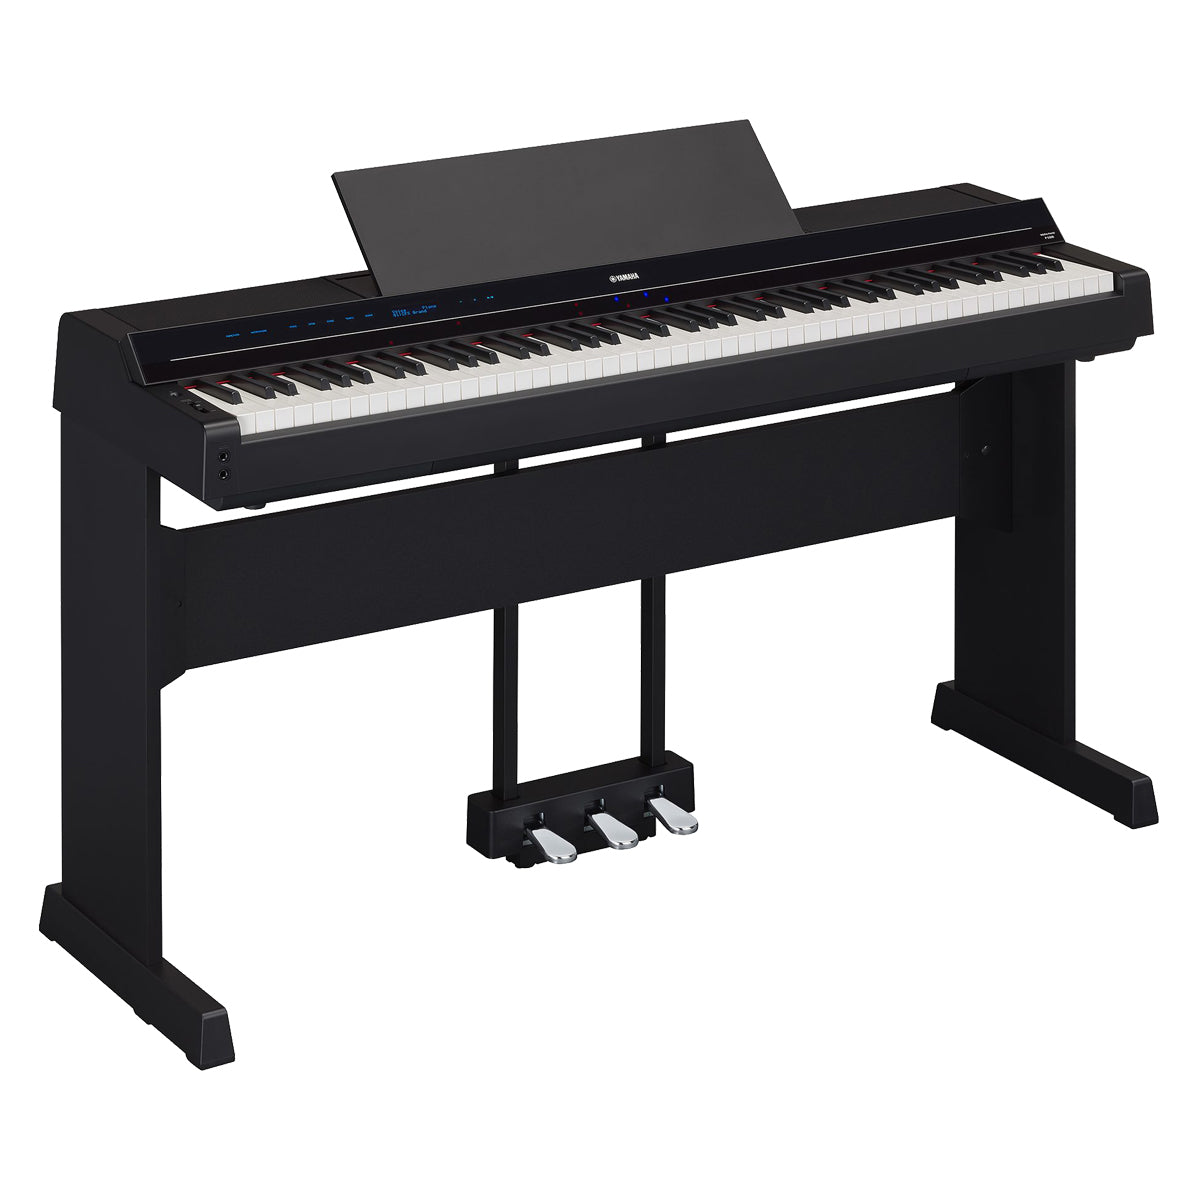 Collage of everything that is included with the Yamaha P-S500 Digital Piano - Black HOME ESSENTIALS BUNDLE